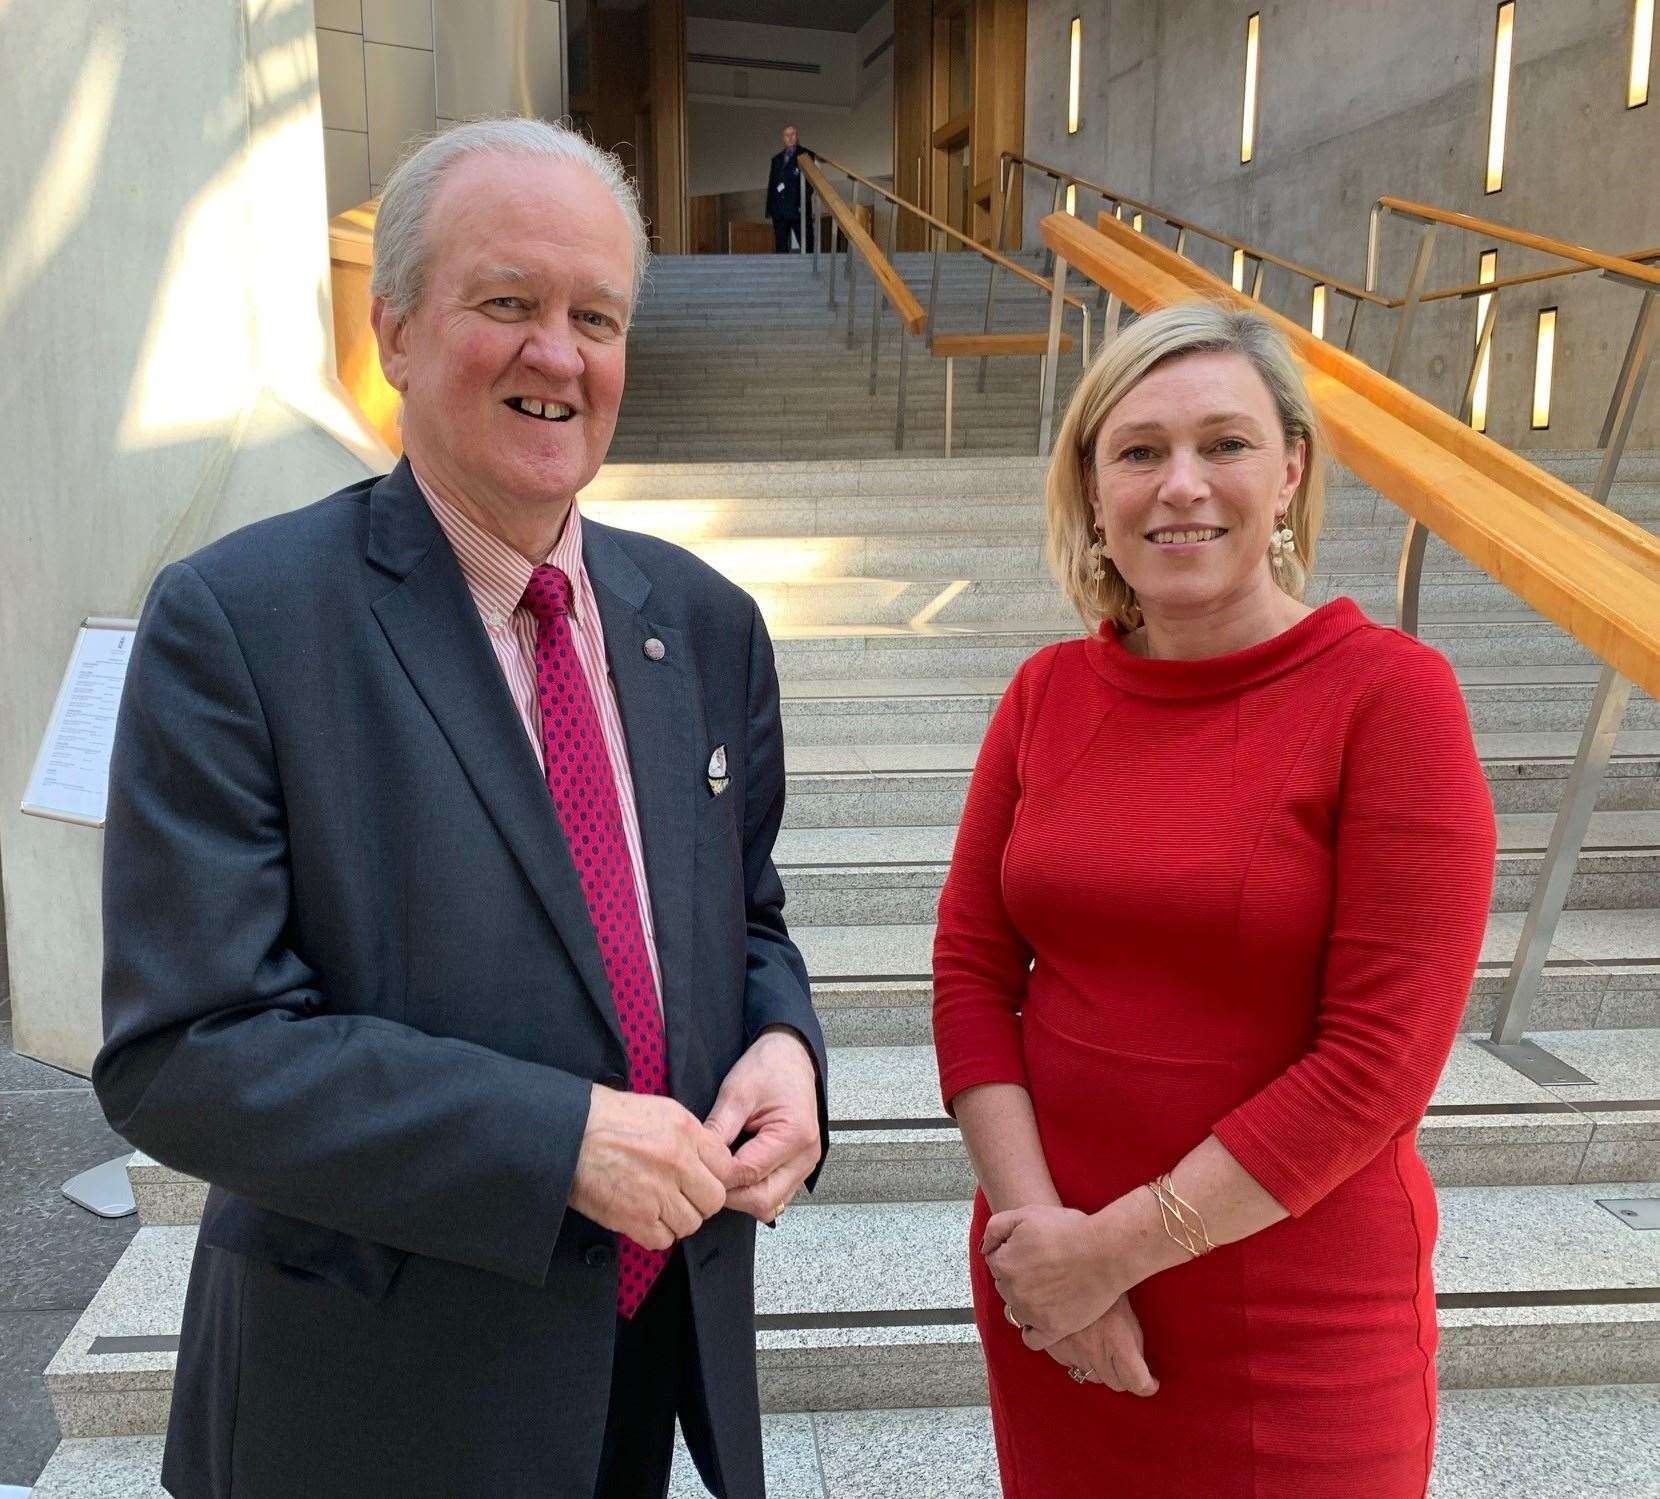 MSPs Stewart Stevenson and Gillian Martin have welcomed the number of baby boxes that have been delivered in the NHS Grampian area since its introduction.